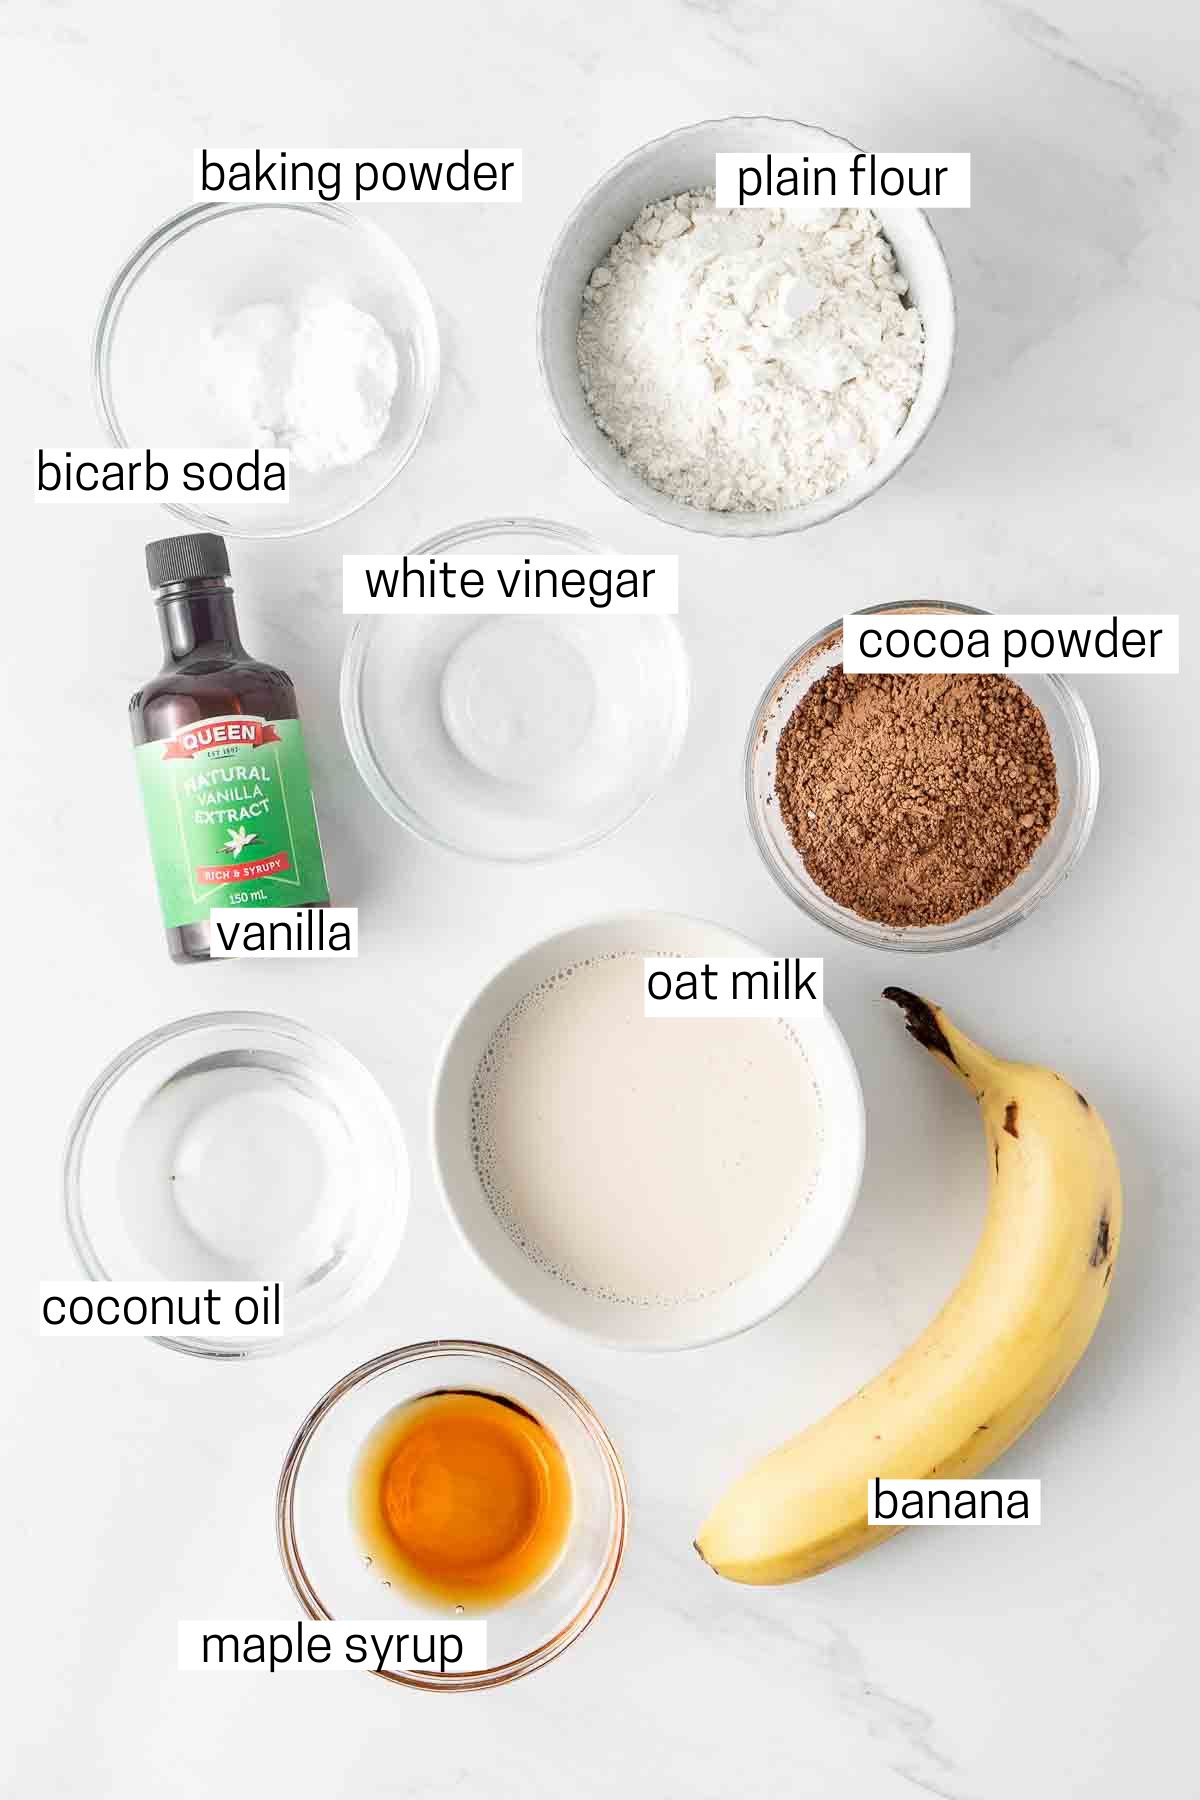 All ingredients needed to make chocolate pancakes laid out in small bowls.